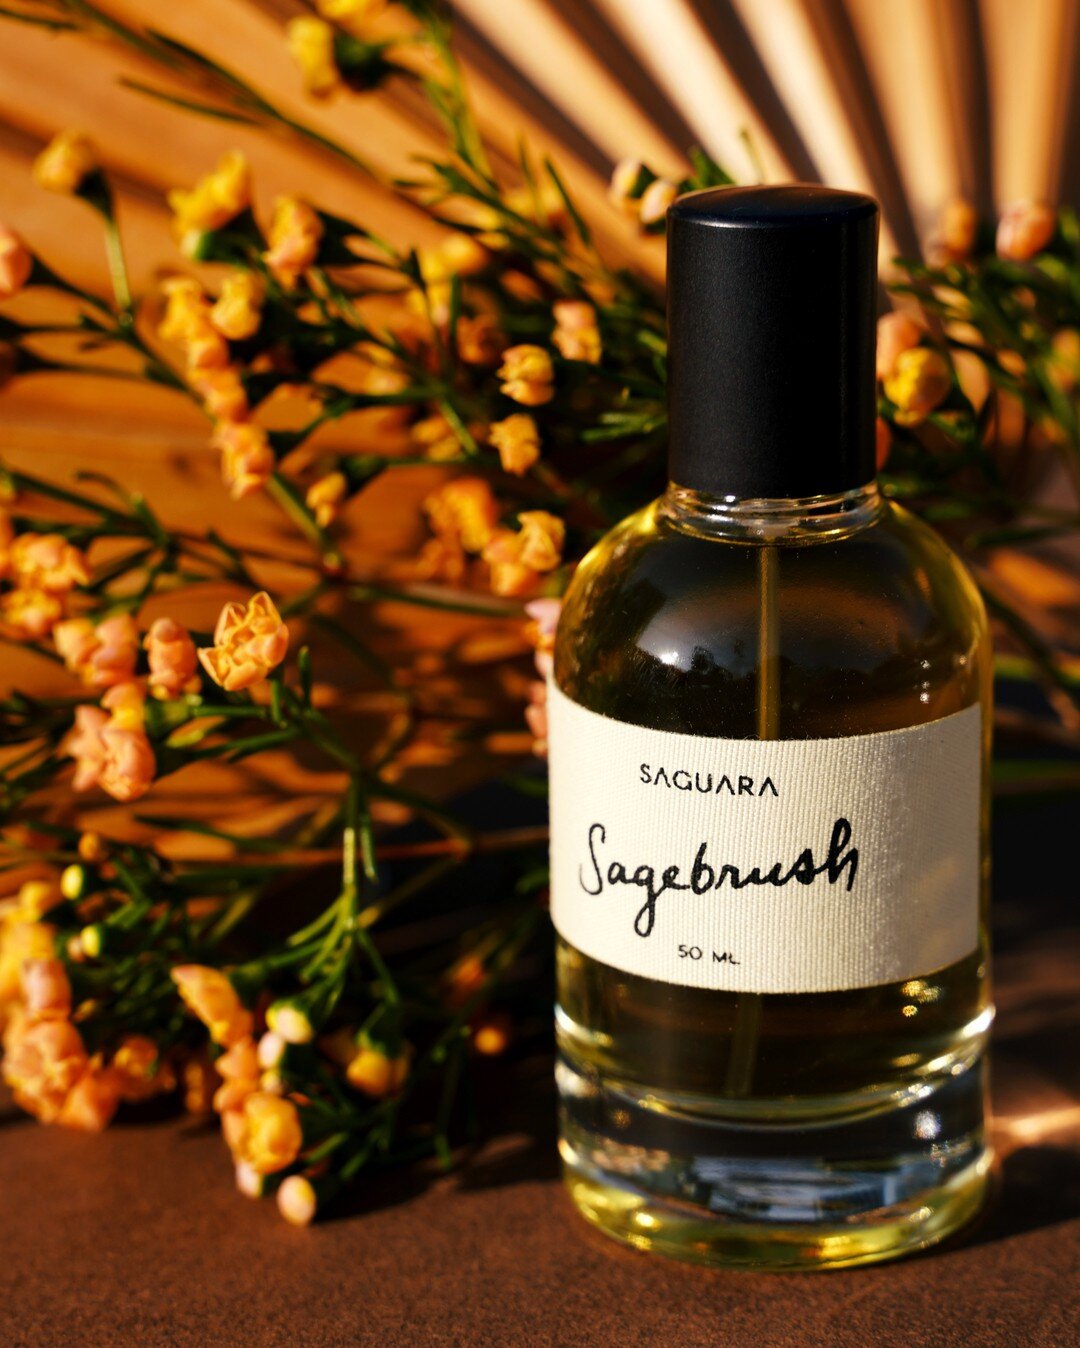 Sagebrush has notes of cedar, cannabis and white sage. Creating an earthy yet fresh scent.